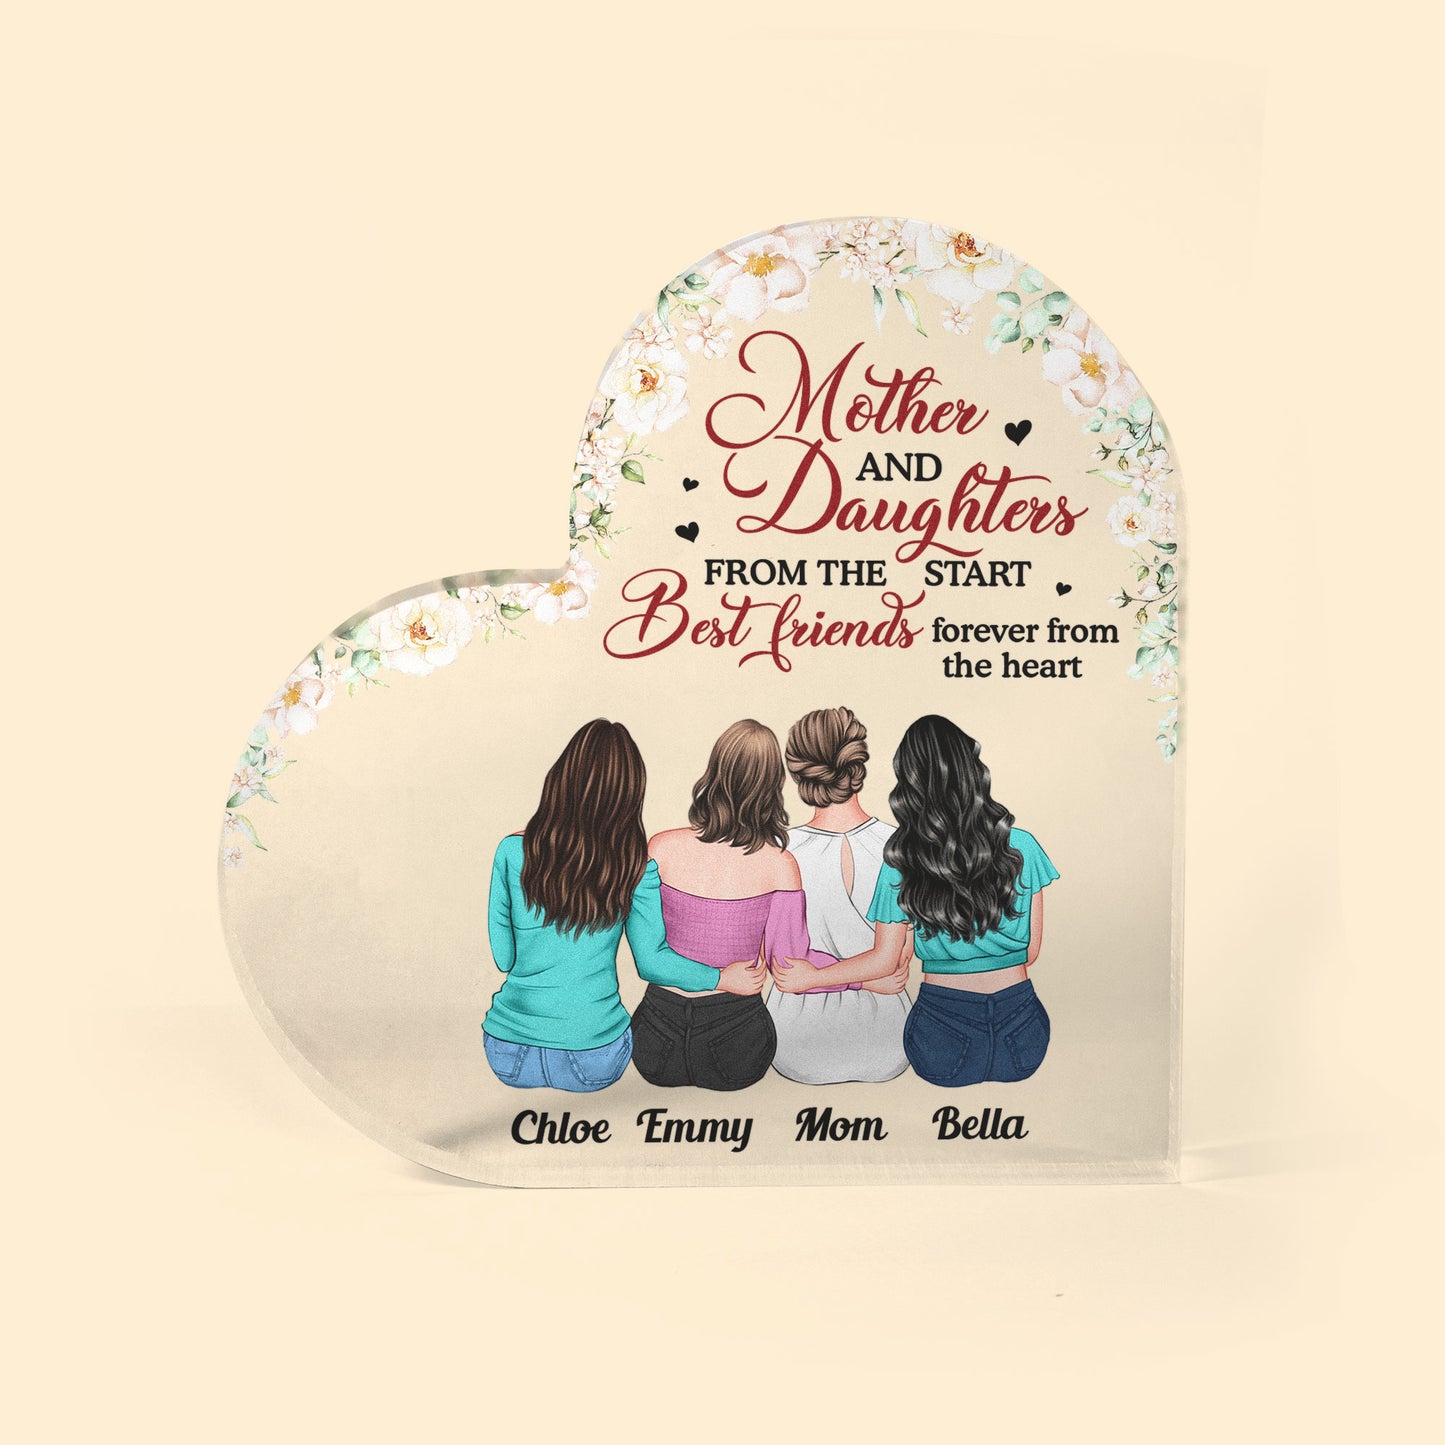 https://macorner.co/cdn/shop/products/Mother-_-Daughter-BFF-From-The-Heart-Personalized-Heart-Shaped-Acrylic-Plaque-Heartwarming-Mothers-Day-Gift-For-Mom-Mama-Mother-From-Daughter_1.jpg?v=1647510782&width=1445